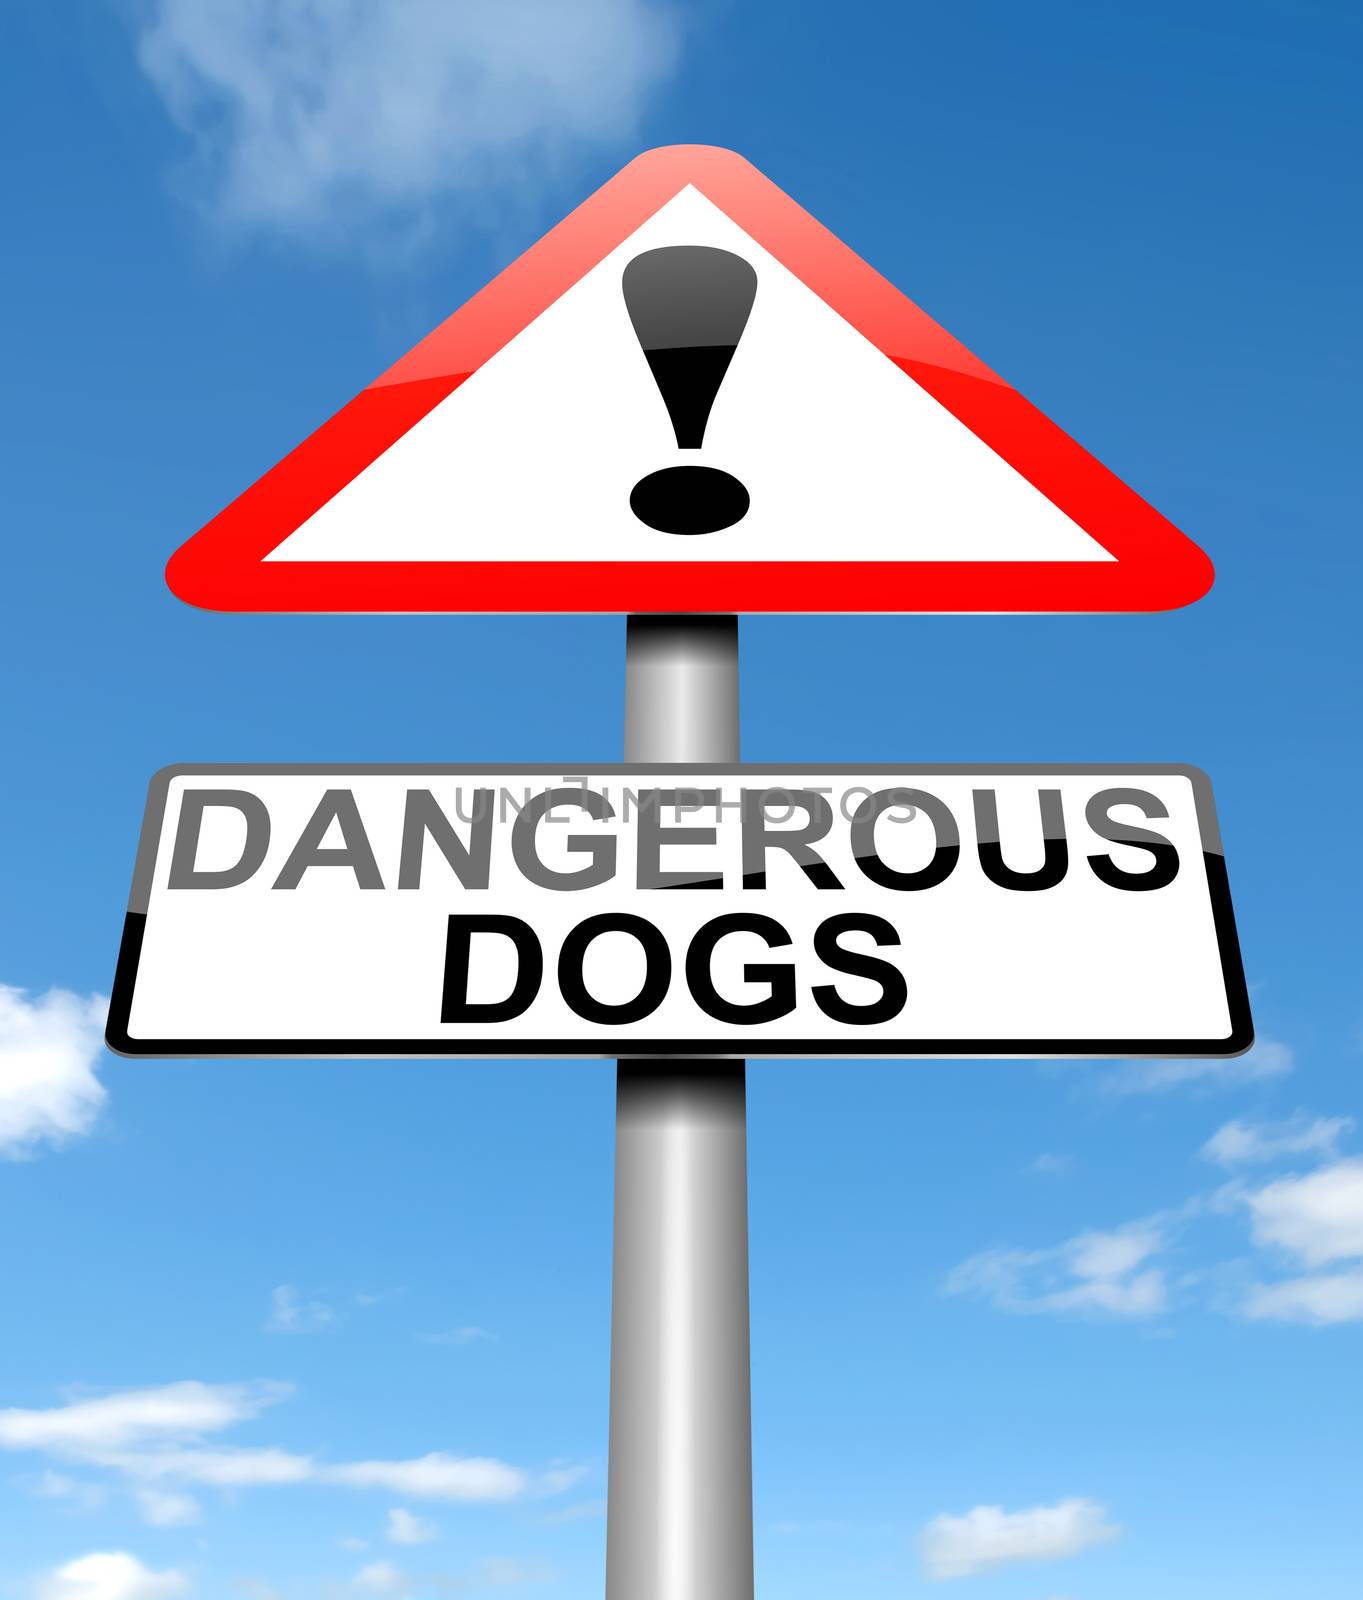 Illustration depicting a sign with a dangerous dogs concept.